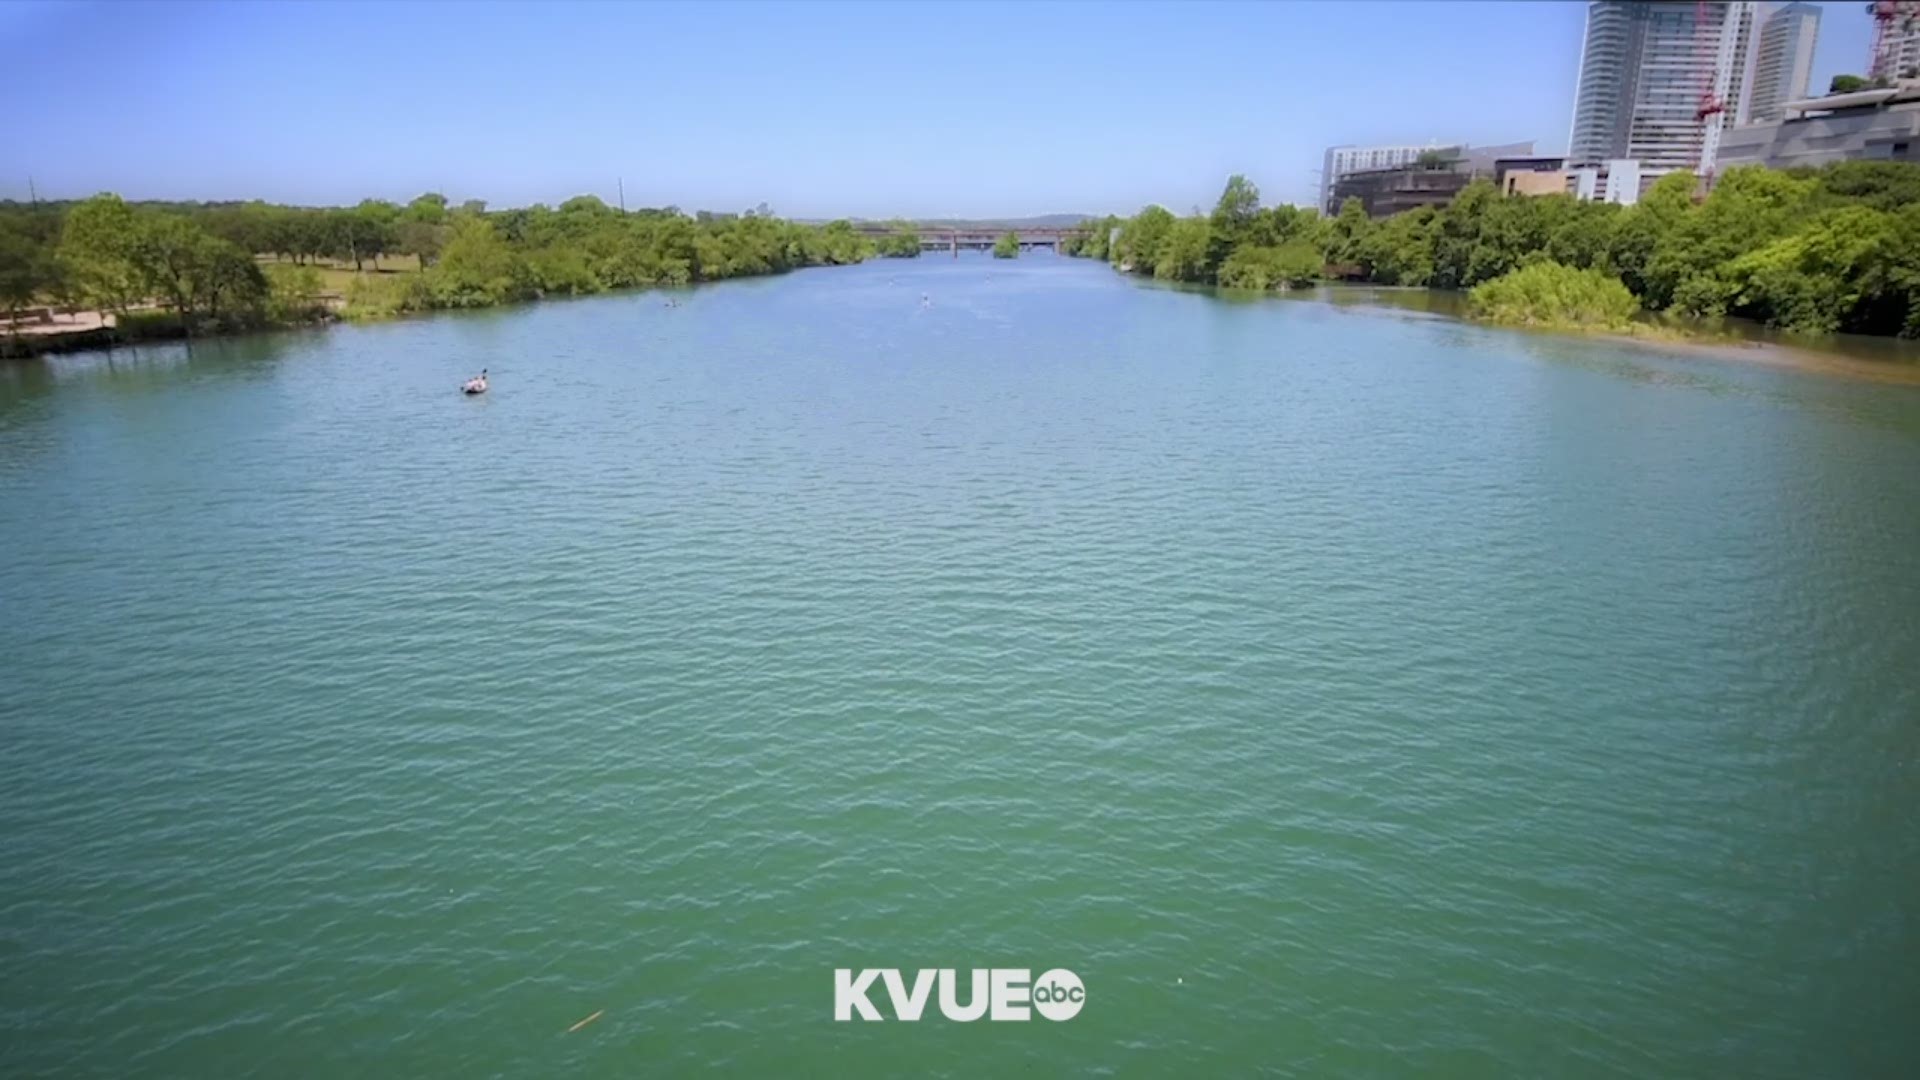 Do you miss Lady Bird Lake? KVUE does too.